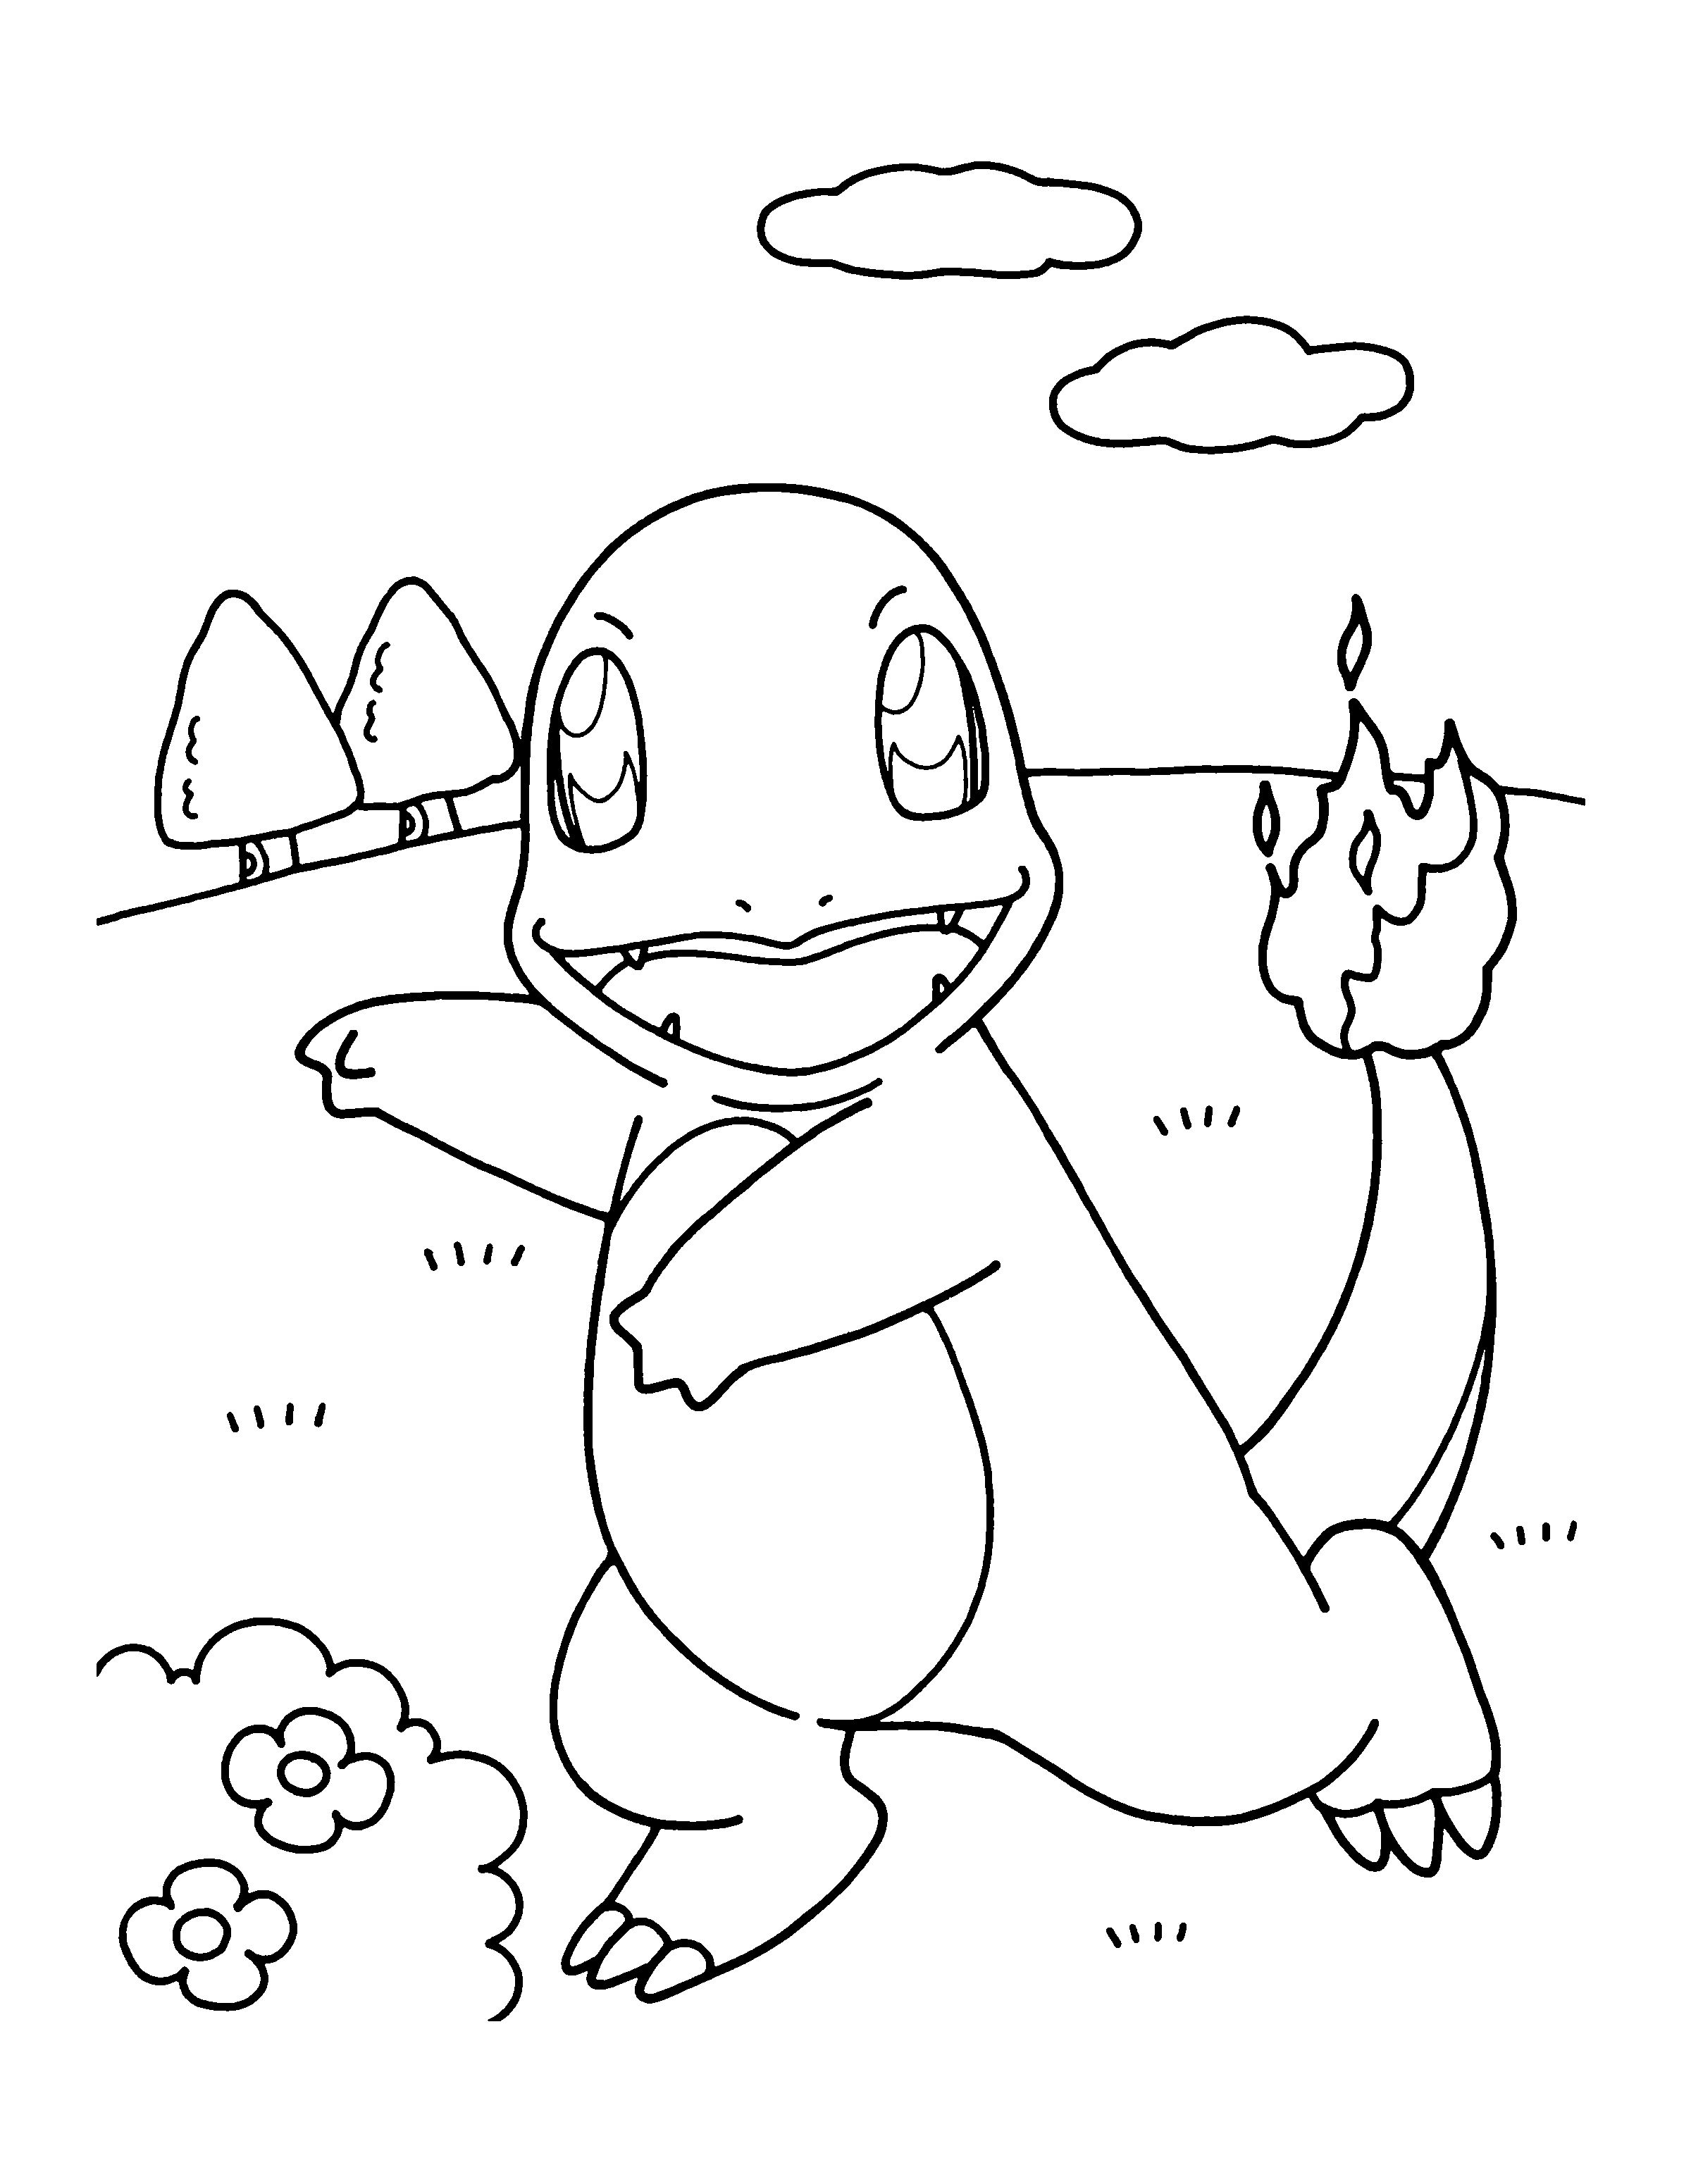 coloring pokemon pages pokemon coloring pages join your favorite pokemon on an pokemon coloring pages 